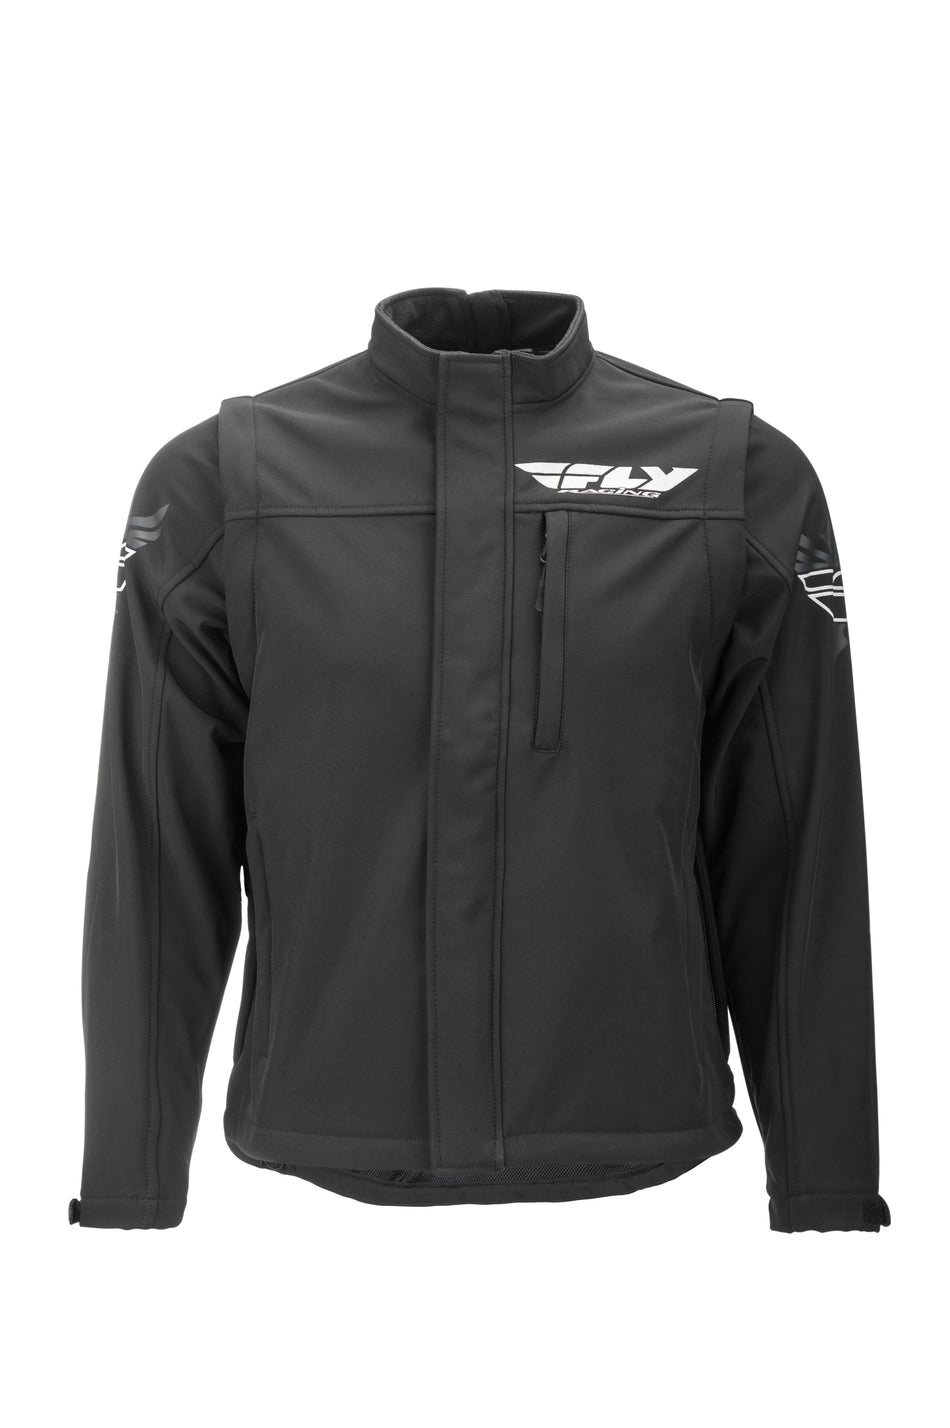 FLY RACING Black Ops Convertible Jacket Black Md 354-6060M